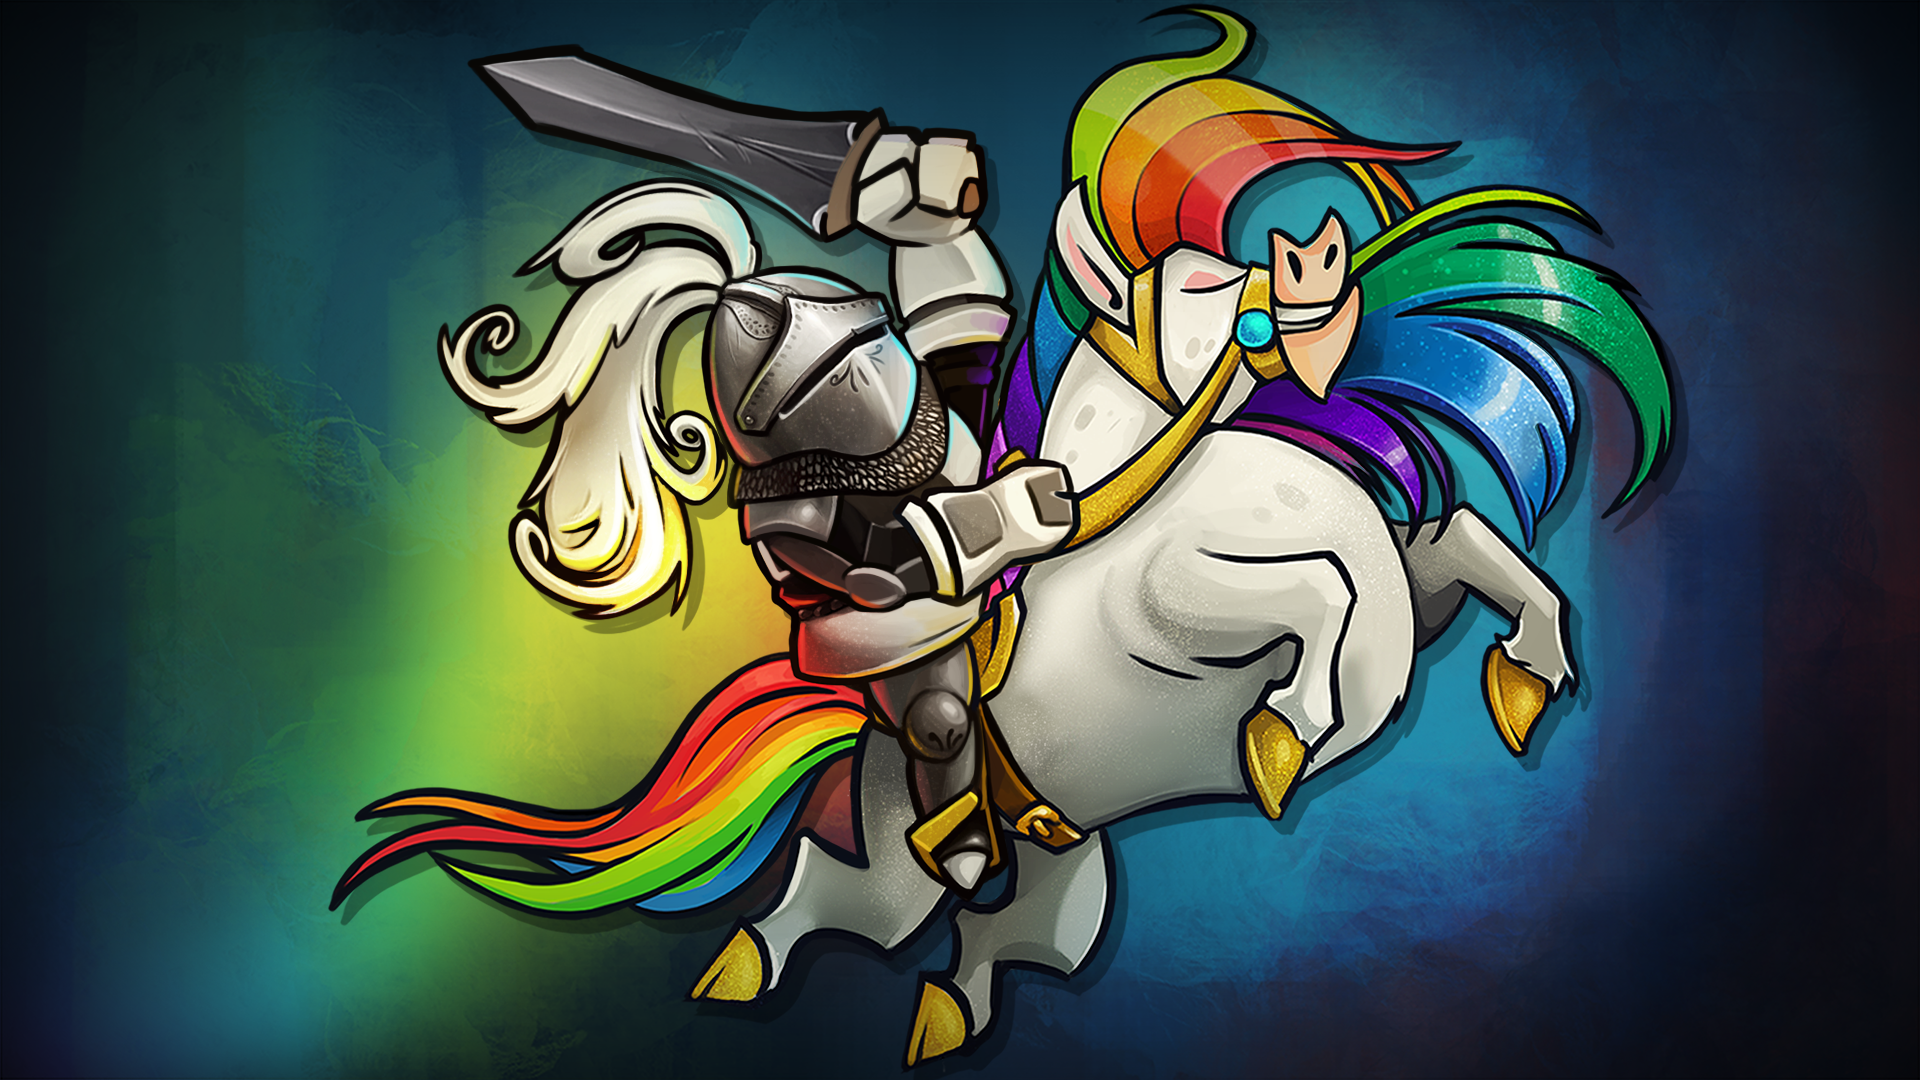 Icon for Ride the Rainbow